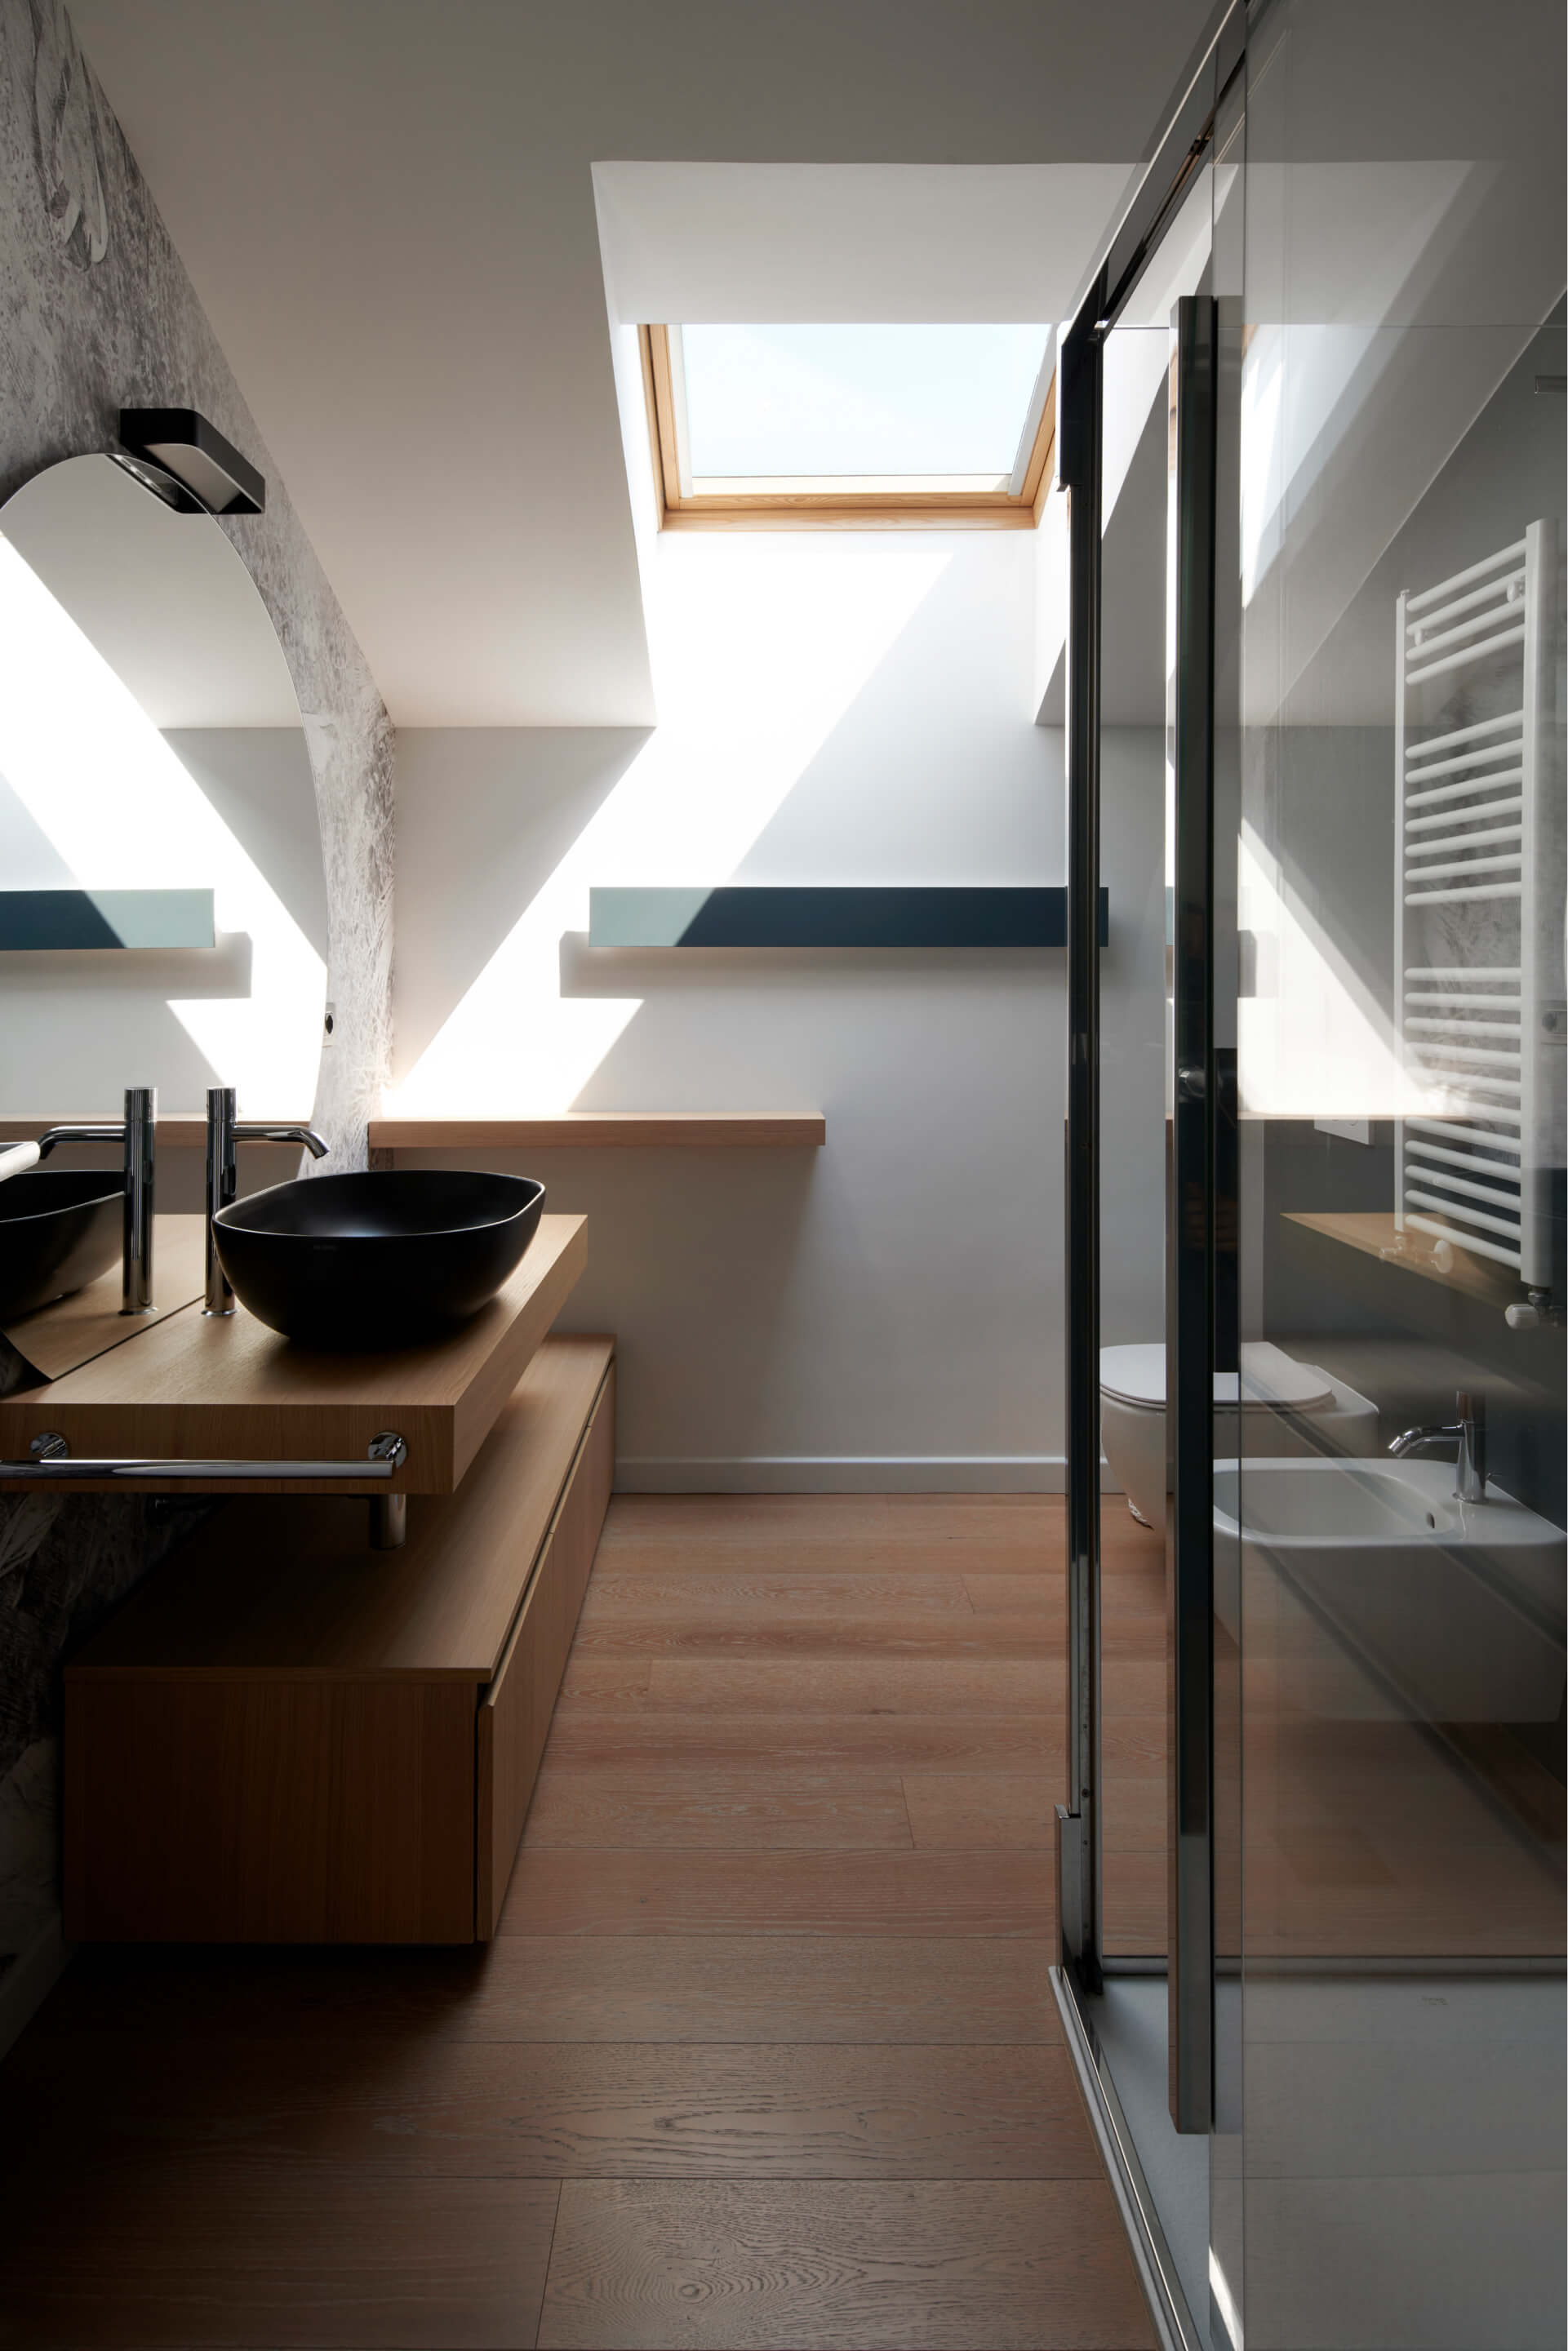 A modern bathroom area with sink and shower